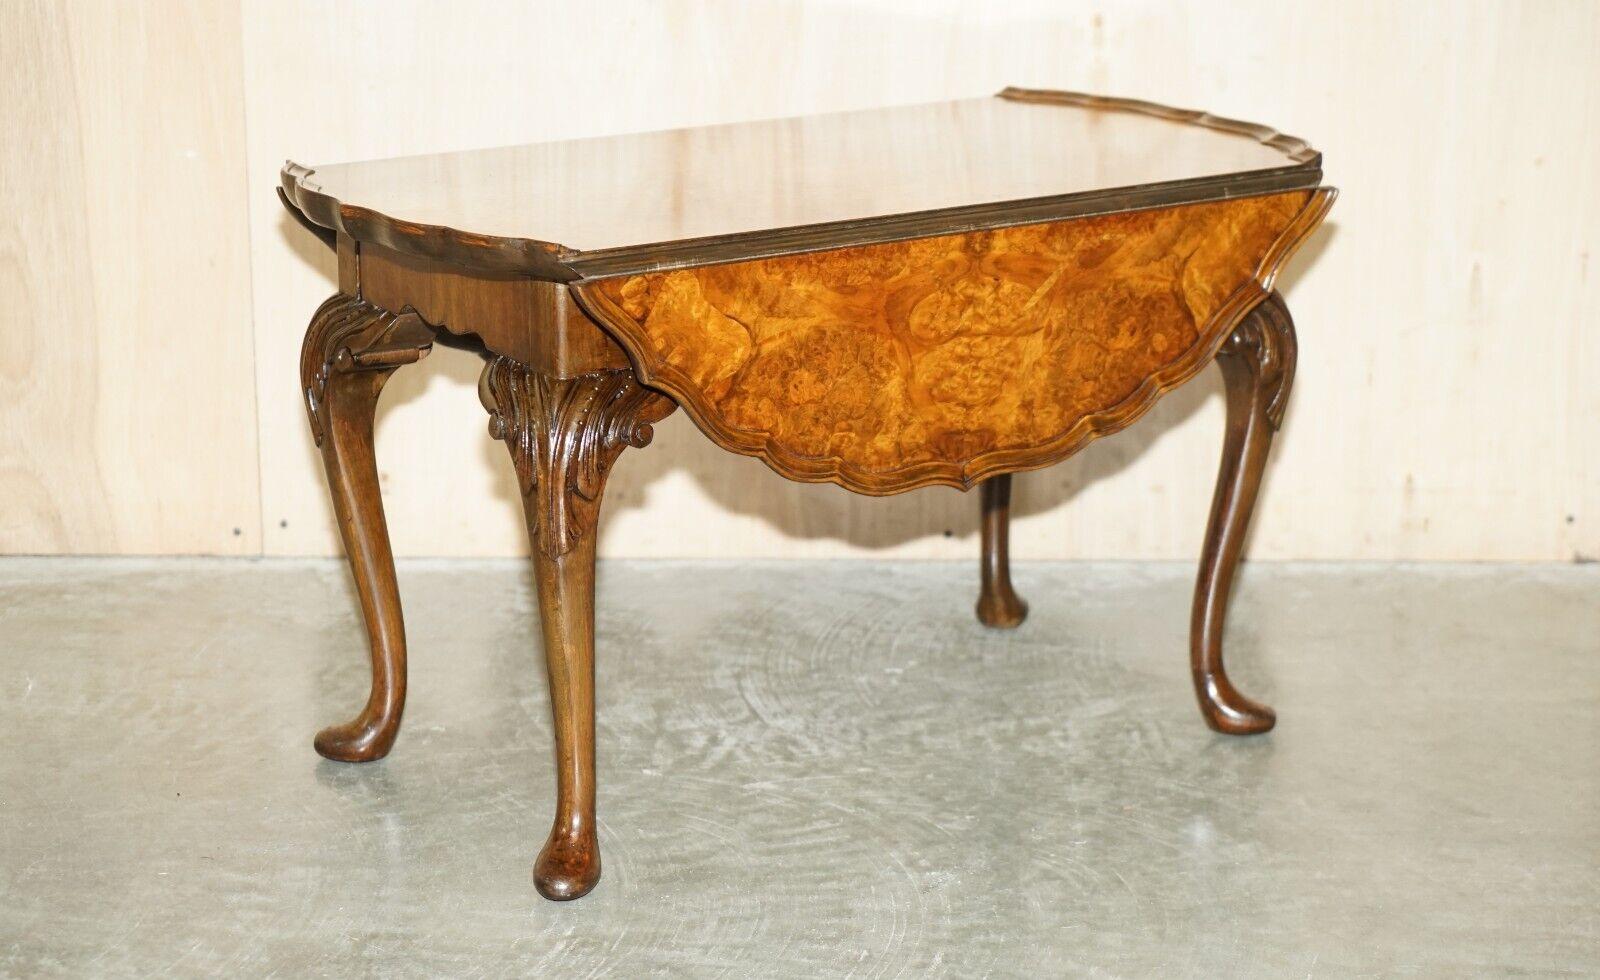 Royal House Antiques

Royal House Antiques is delighted to offer for sale this stunning hand made in England, quarter cut and burr walnut, extending coffee table with stunning timber patina and scalloped edge pie crust top 

Please note the delivery